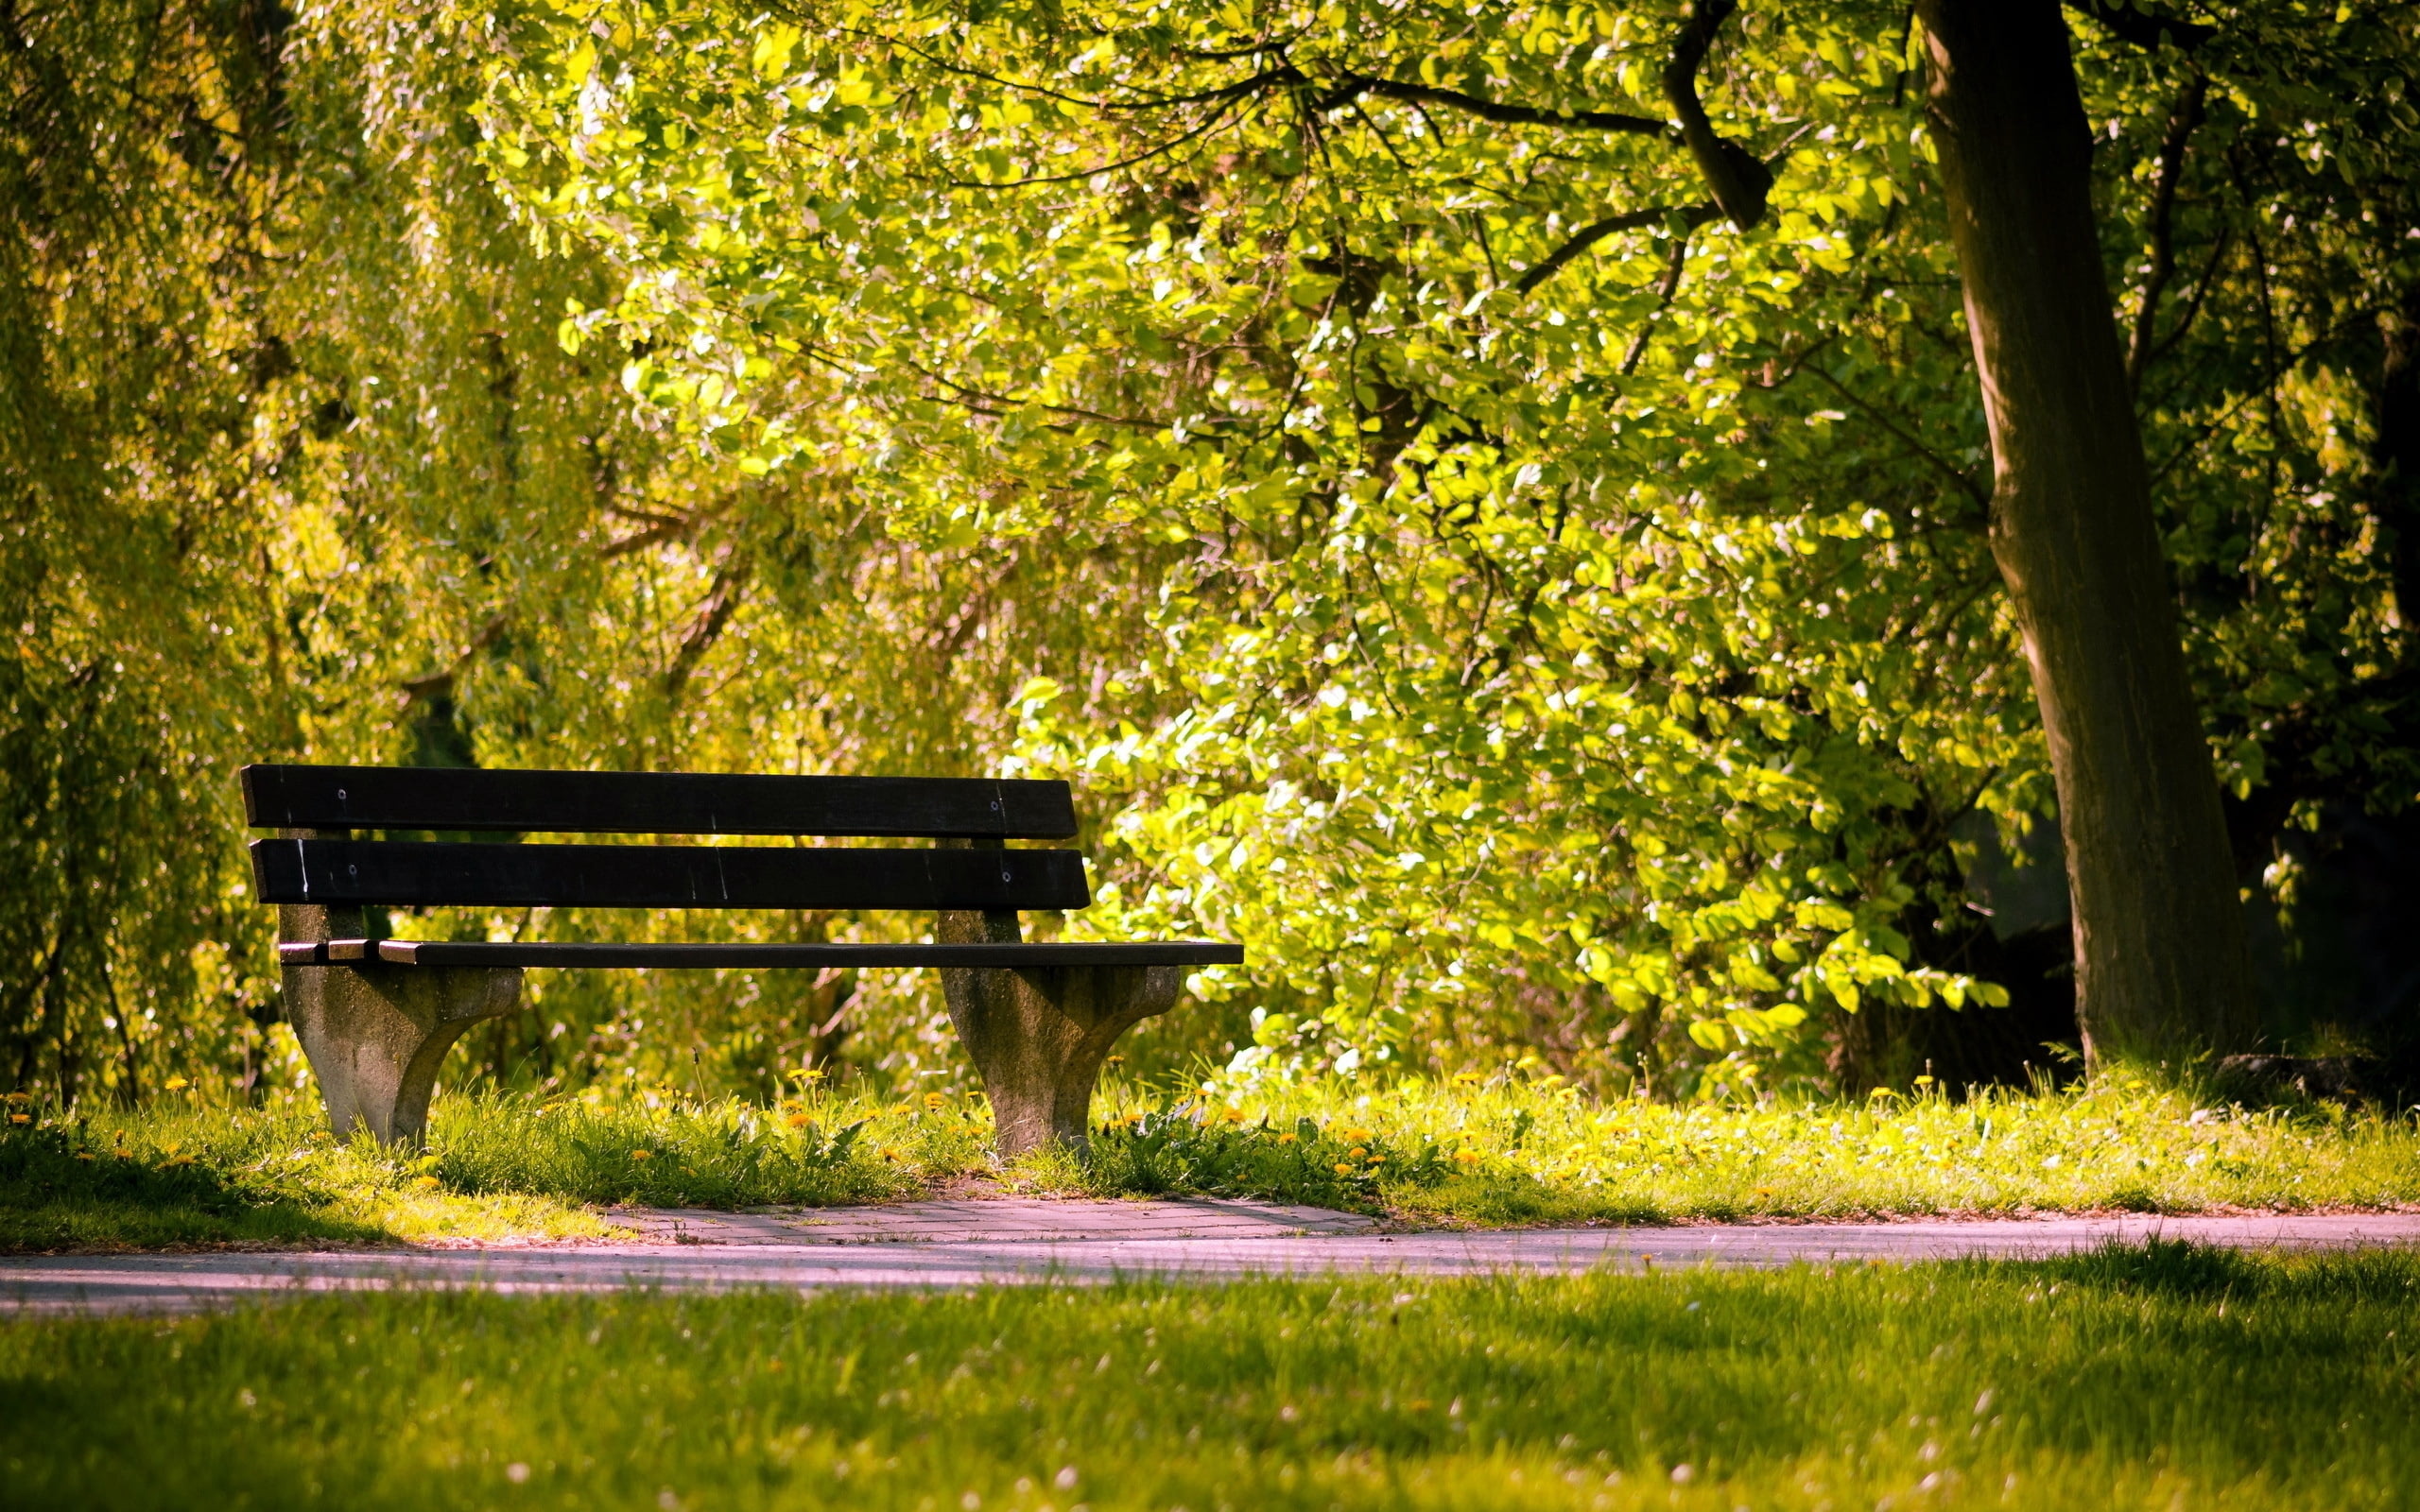 3840x2160 Resolution Brown Wooden Bench Near On Green Leafed Trees